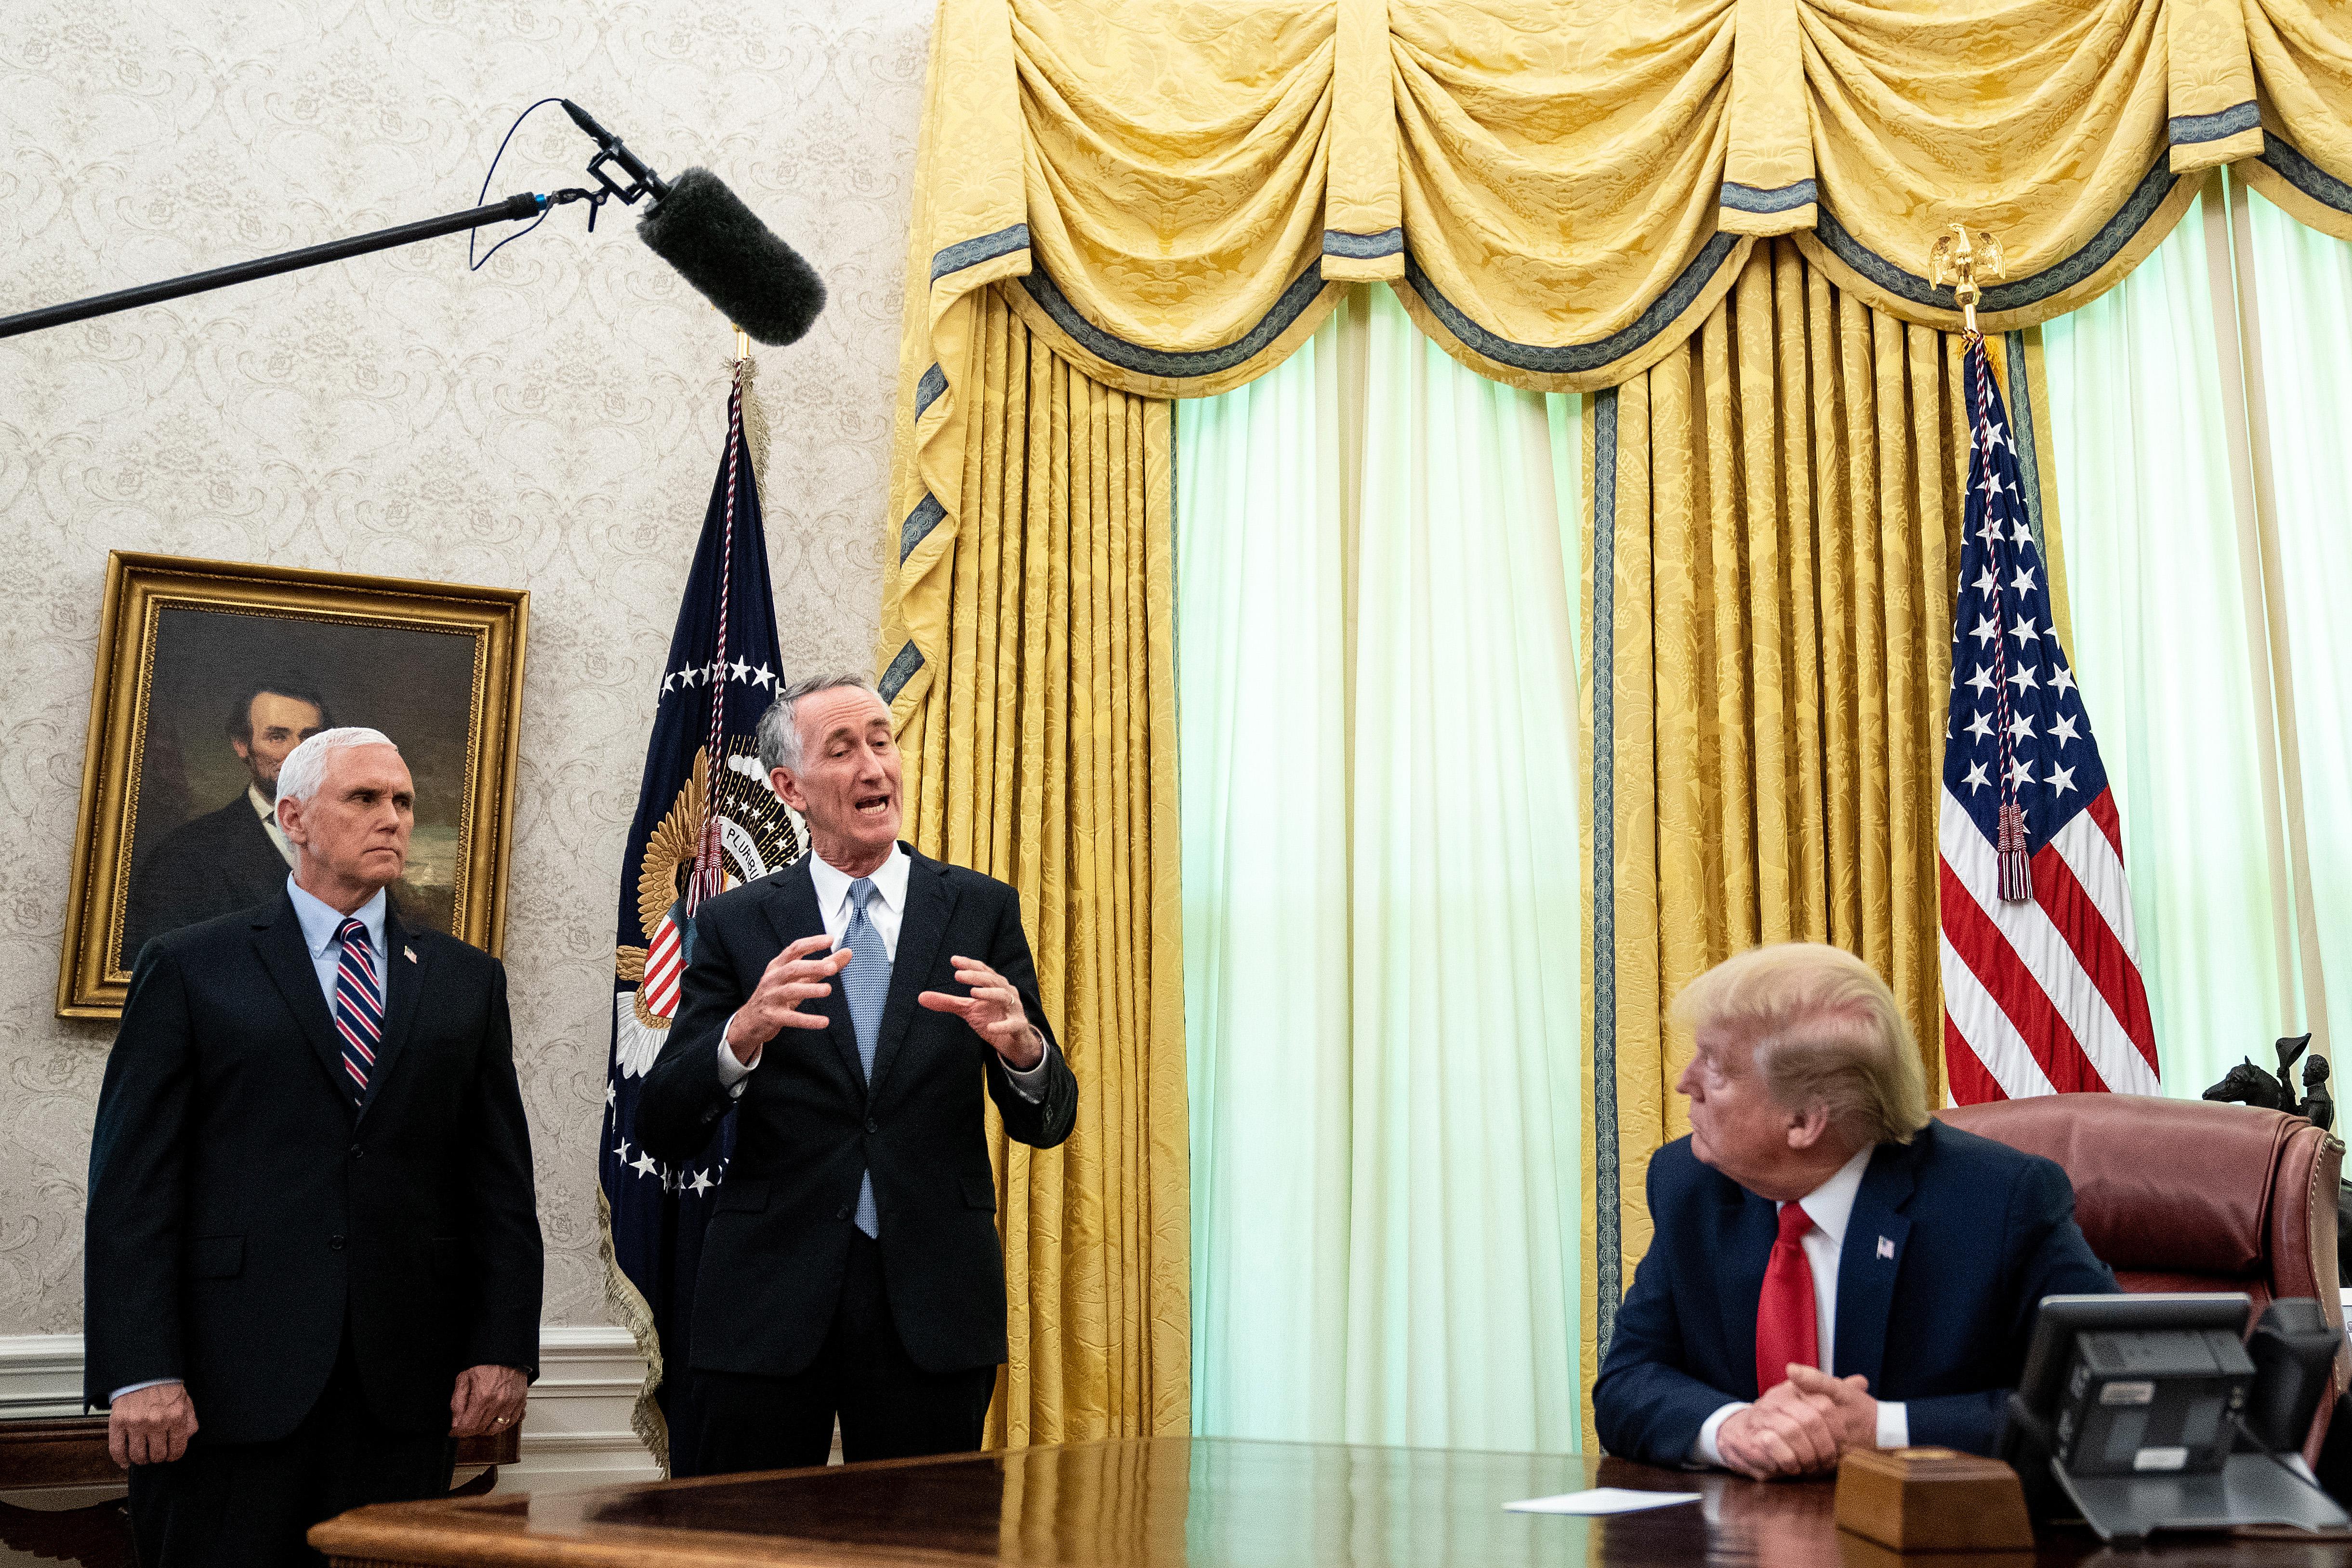 Pence and O'Day stand in the Oval Office while Trump sits behind his desk.